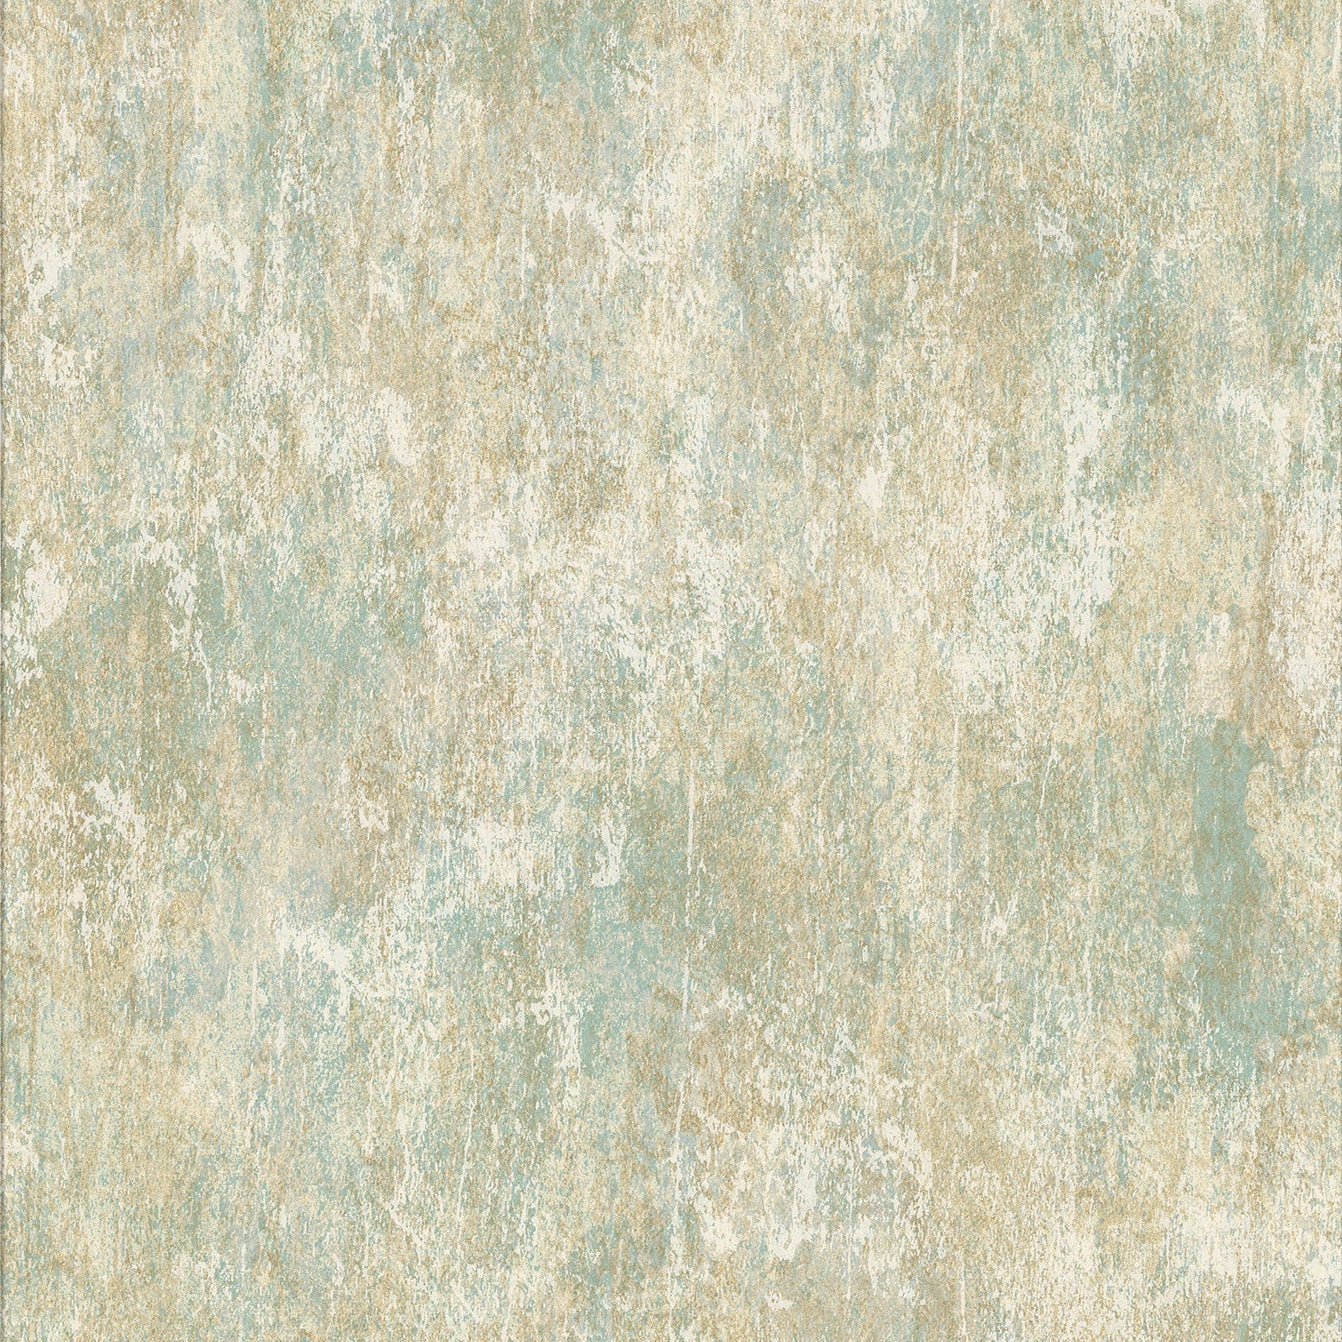 Save 2909-SH-12059 Riva Bovary Multicolor Distressed Texture Brewster Wallpaper